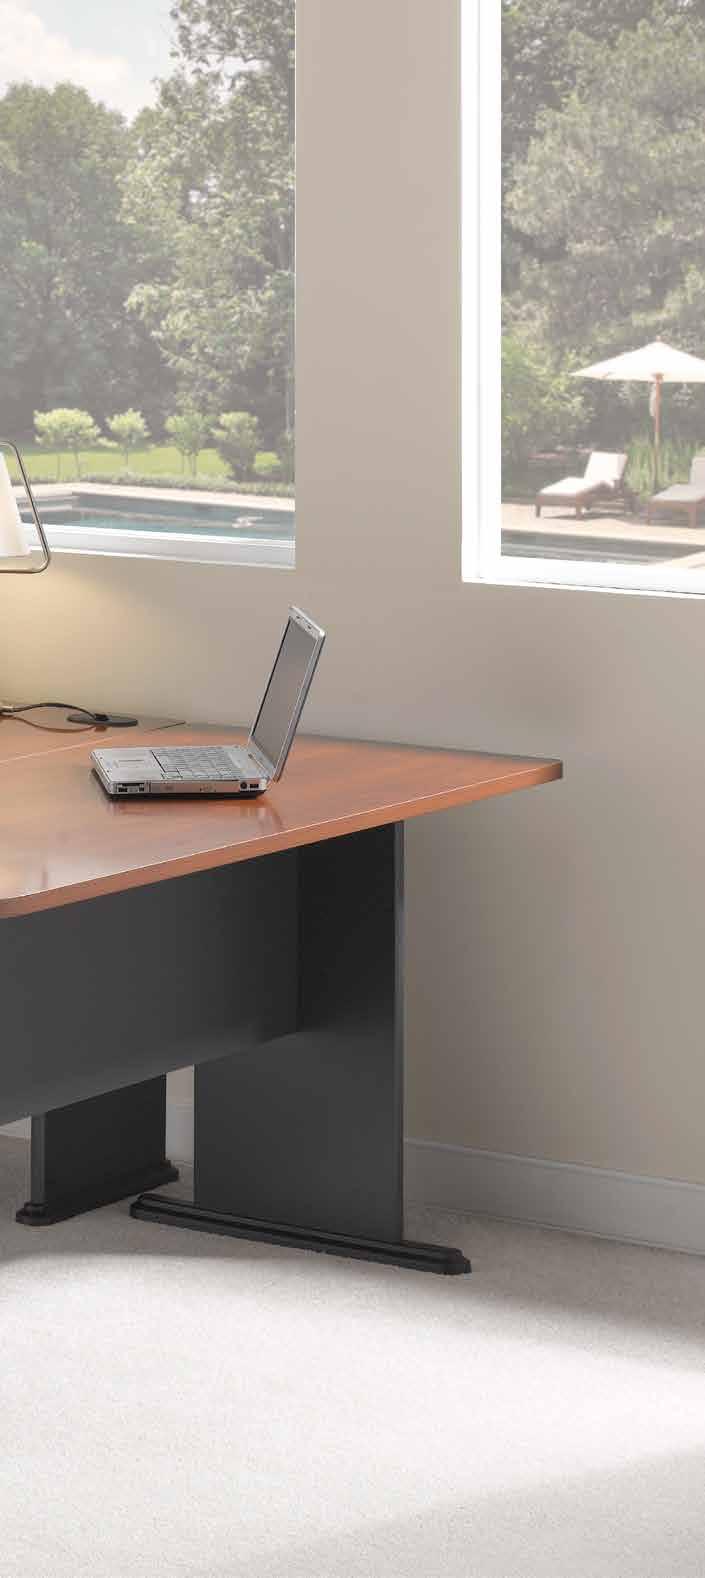 Versatile C-Leg table design permits easy configurations, ideal for Open Space Offices, Cubicles, Multi-Person Workstations and Small Space Solutions.